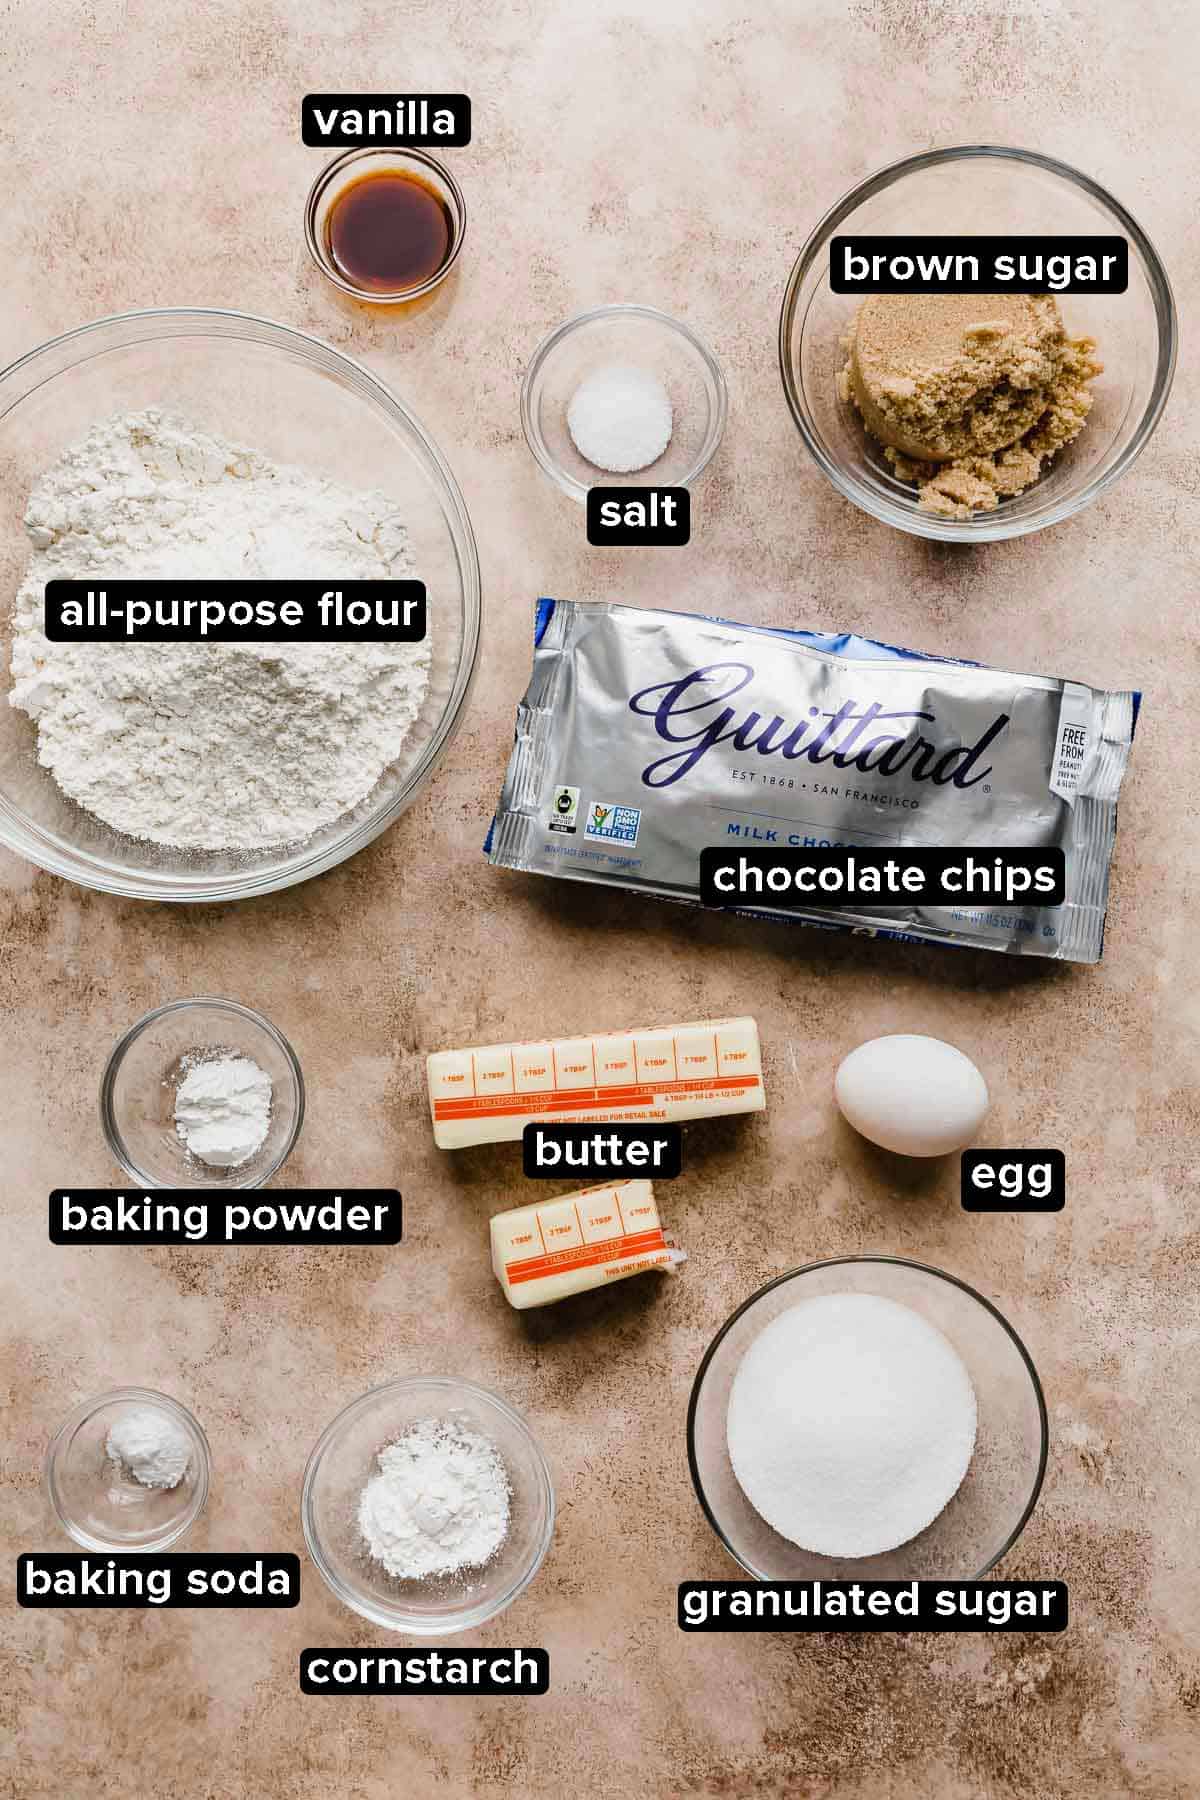 Crumbl Chocolate Chip Cookie Recipe ingredients on a light brown background.